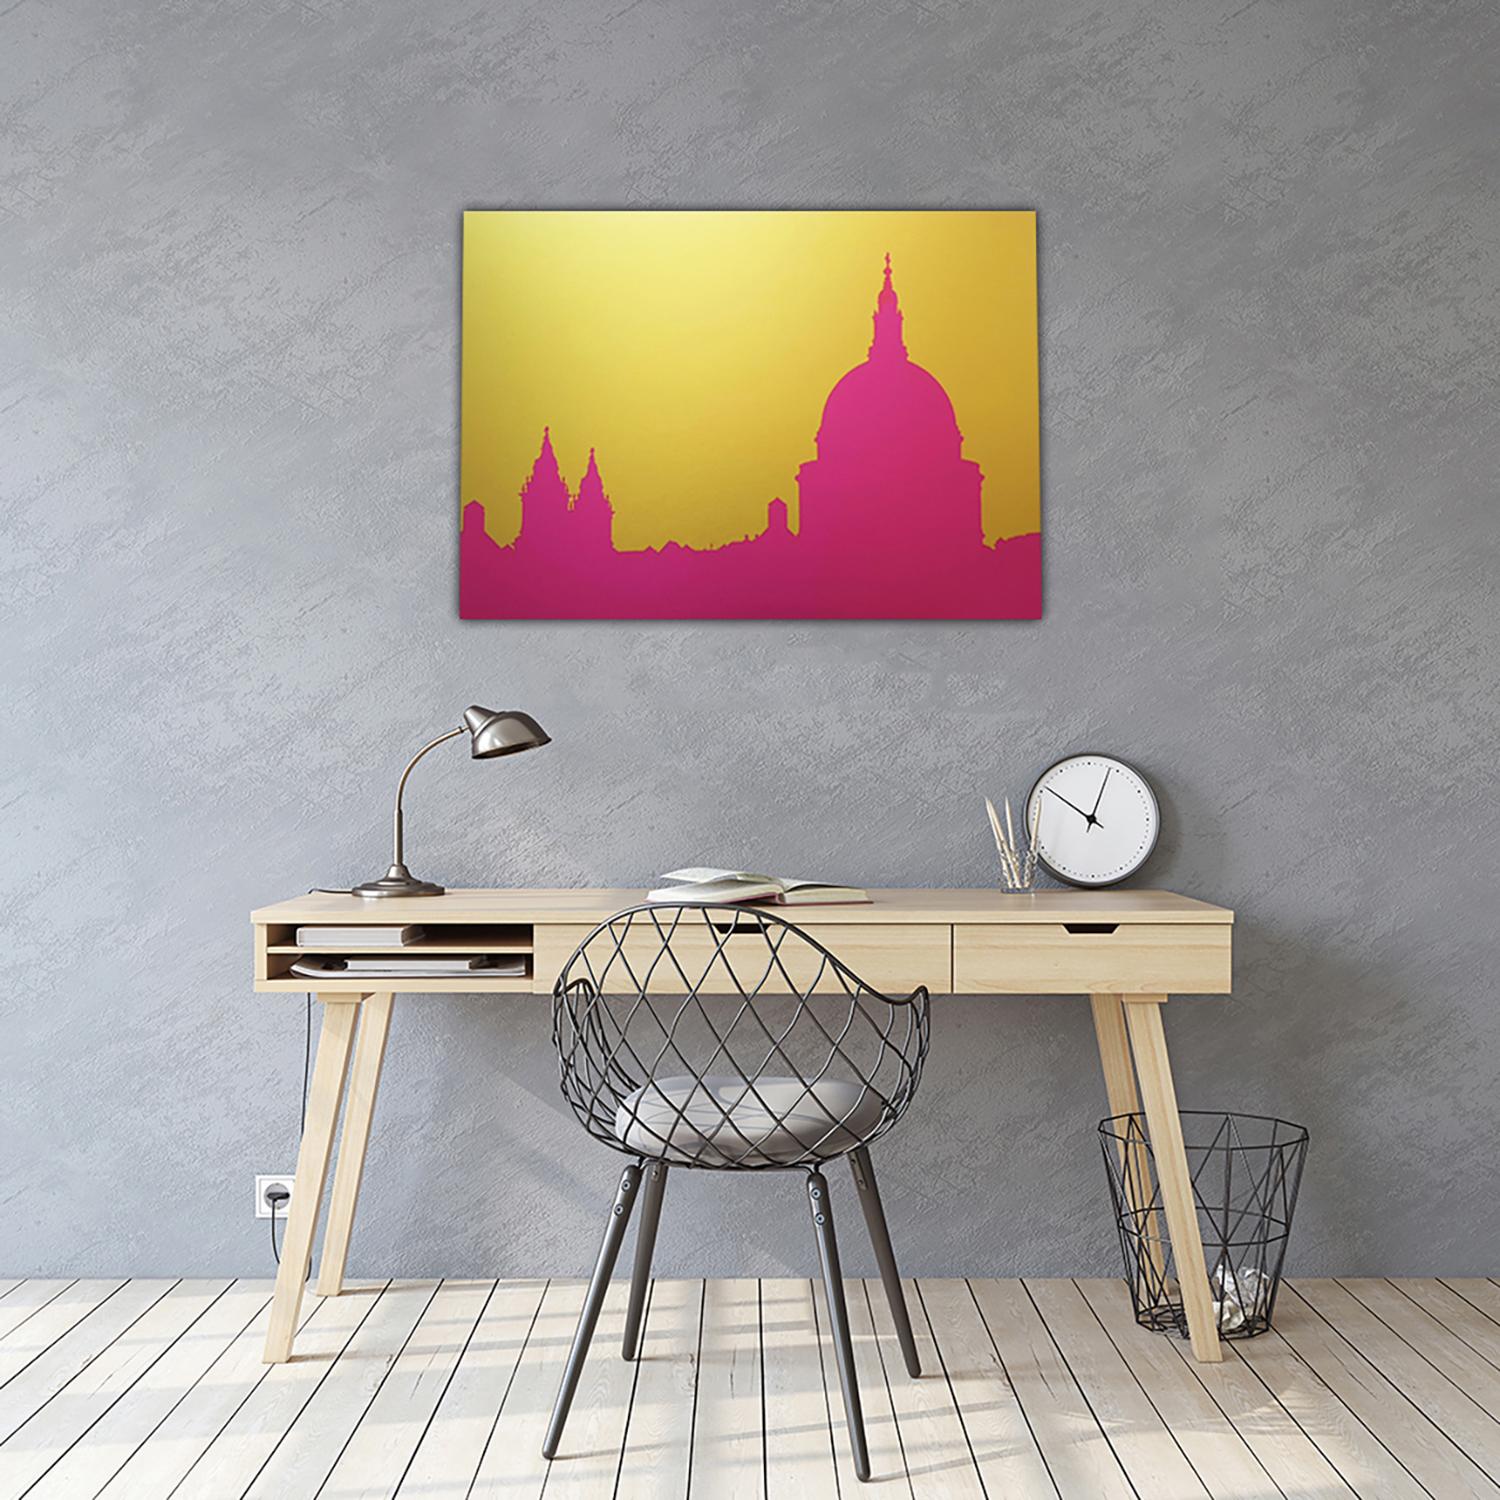 St Pauls, Pop Art Pink By Michael Wallner [2020]

limited_edition
Brushed aluminium
Edition number 25
Image size: H:66 cm x W:91 cm
Complete Size of Unframed Work: H:66 cm x W:91 cm x D:0.3cm
Sold Unframed
Please note that insitu images are purely